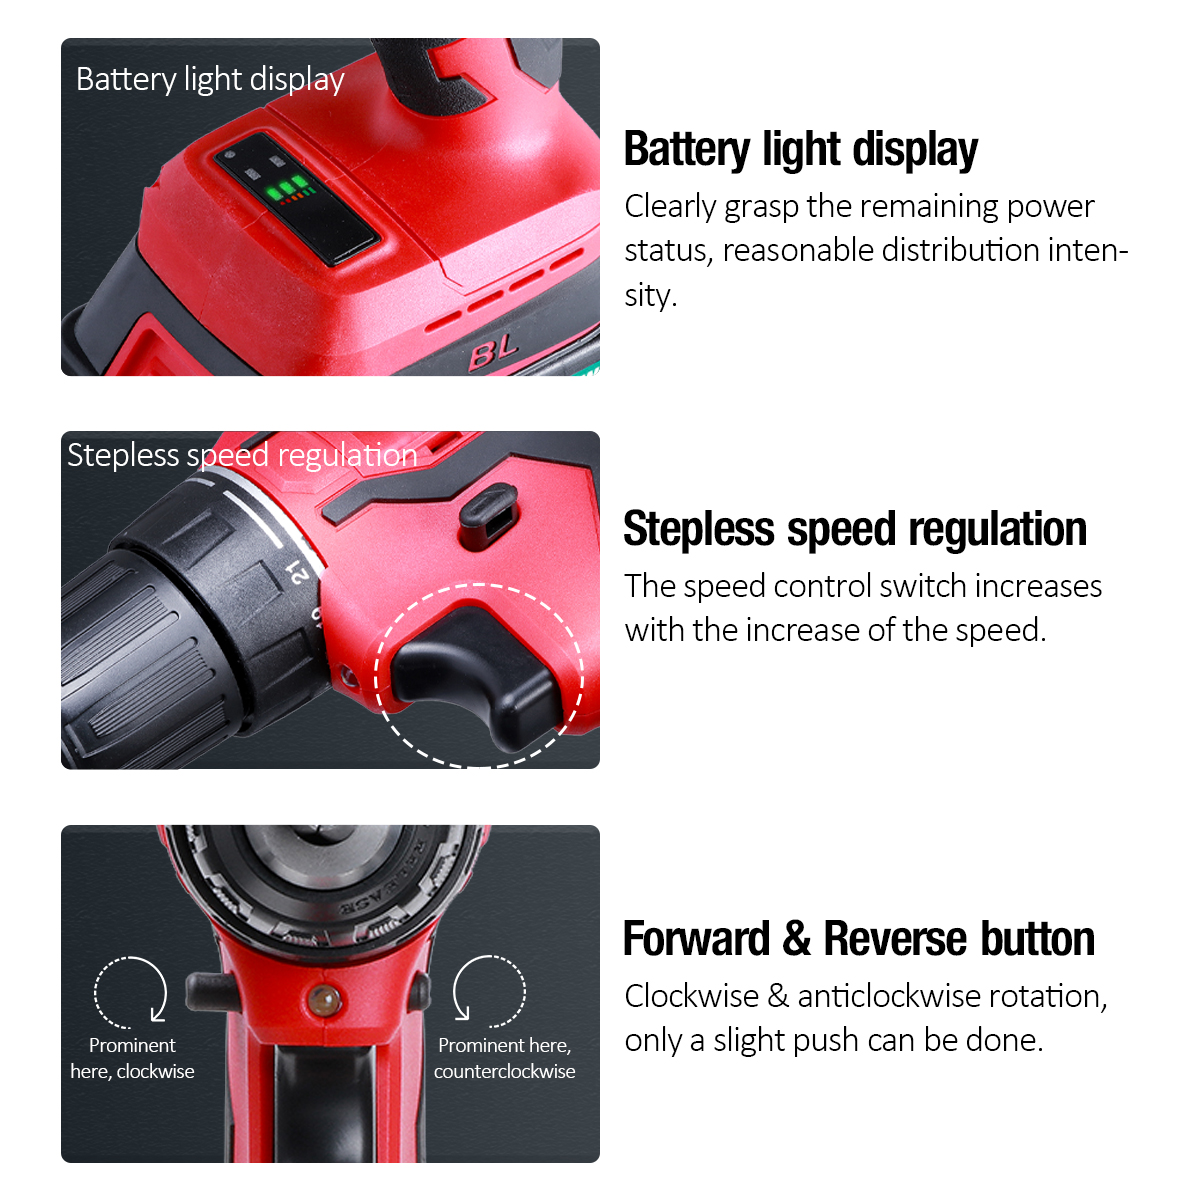 2000mAh-211NM-LED-Cordless-Electric-Drill-2-Speeds-Impact-Drill-W-None1pc2pcs-Battery-1785619-9